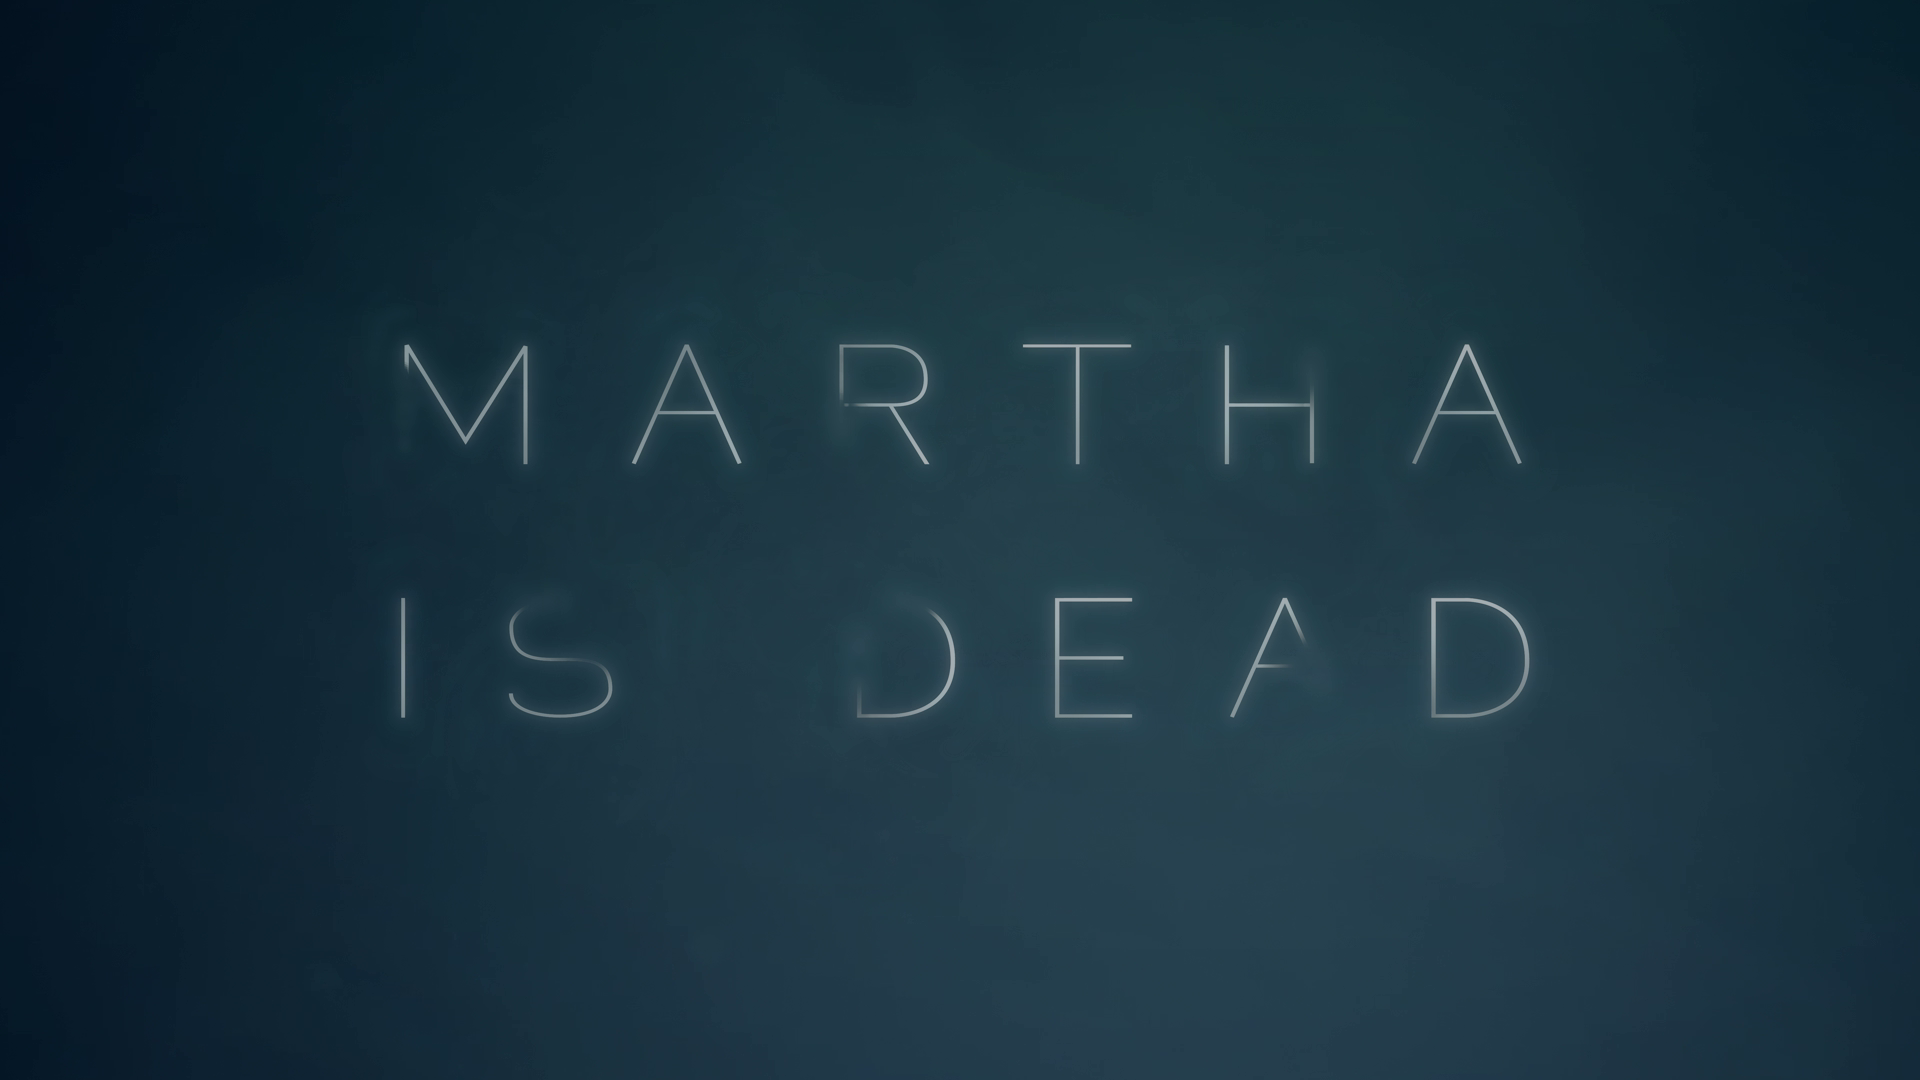 Martha is Dead is a Psychological Horror Arriving in 2020